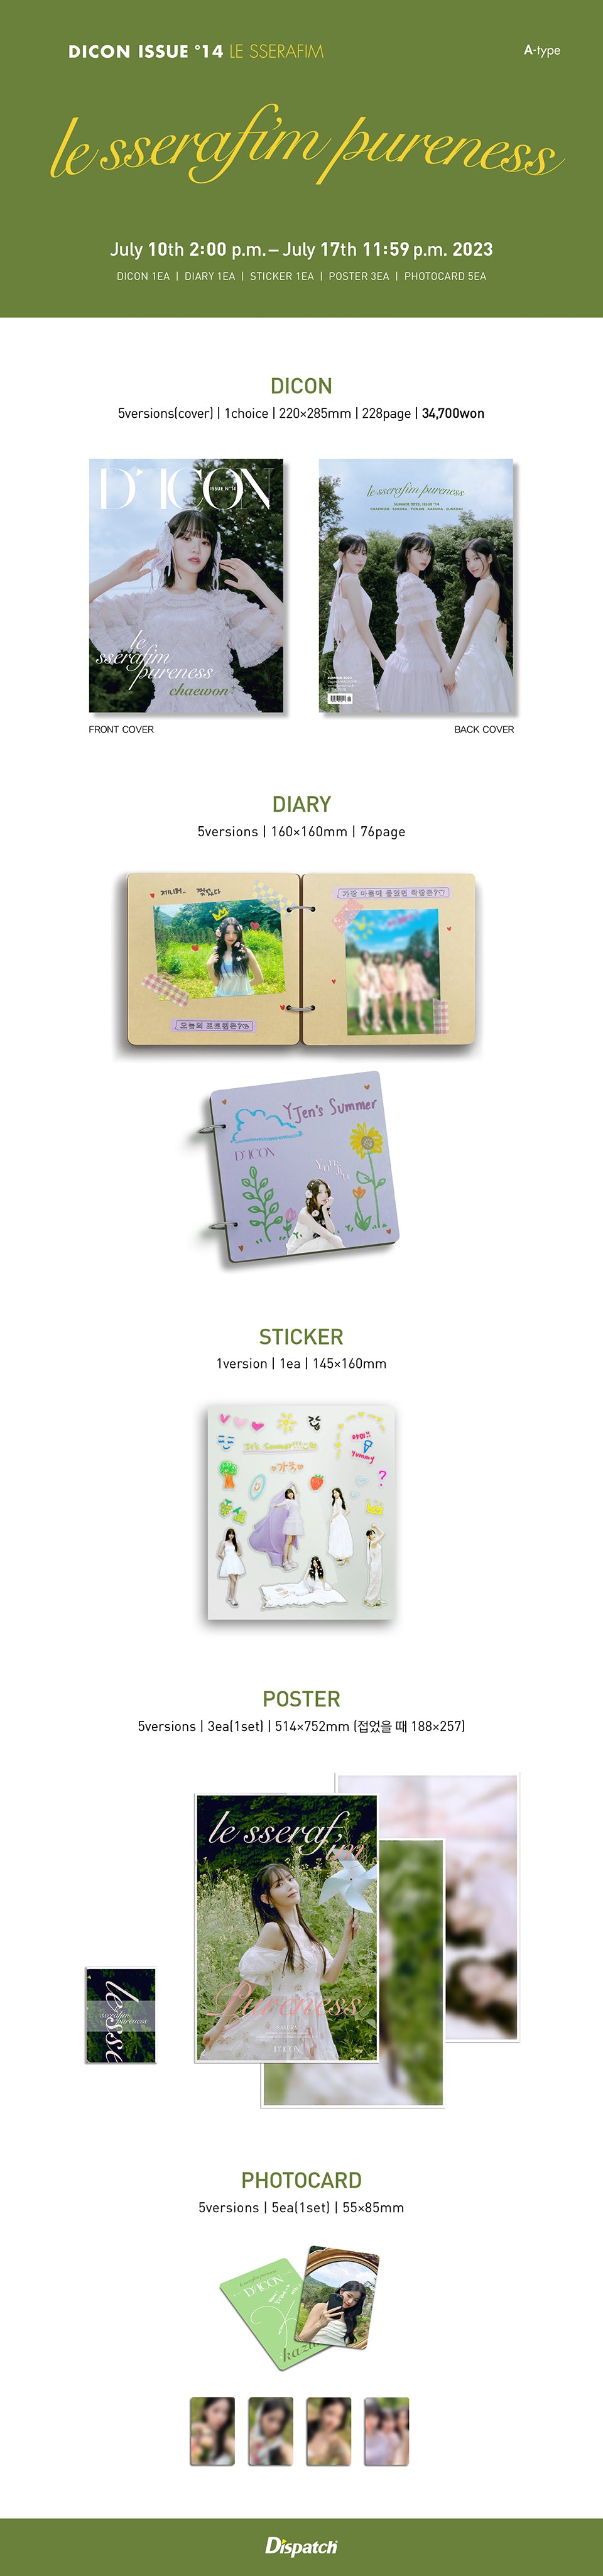 1 Photo Book (228 pages)
1 Diary (76 pages)
1 Sticker
1 Folded Poster
5 Photo Cards